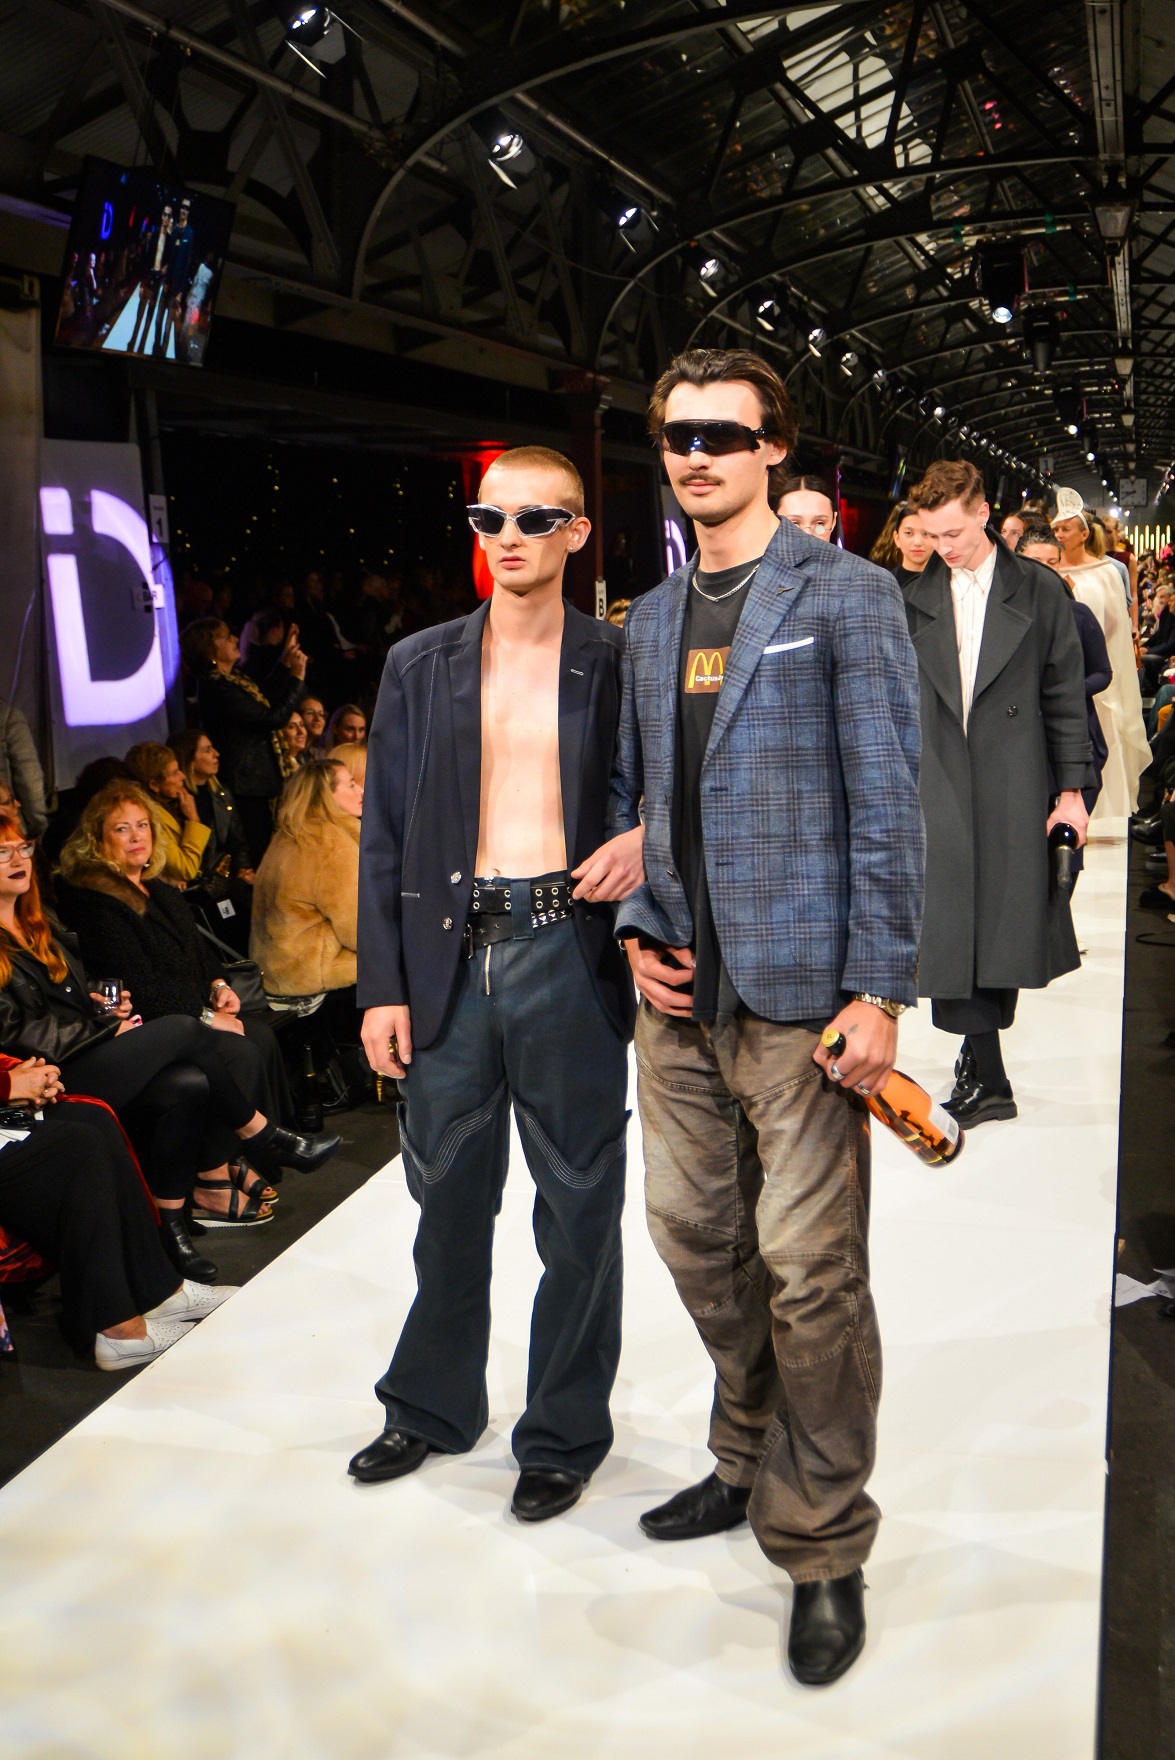 Jonty Blakely (right) and models wearing designs on the catwalk at iD last year. Photo: Chris...